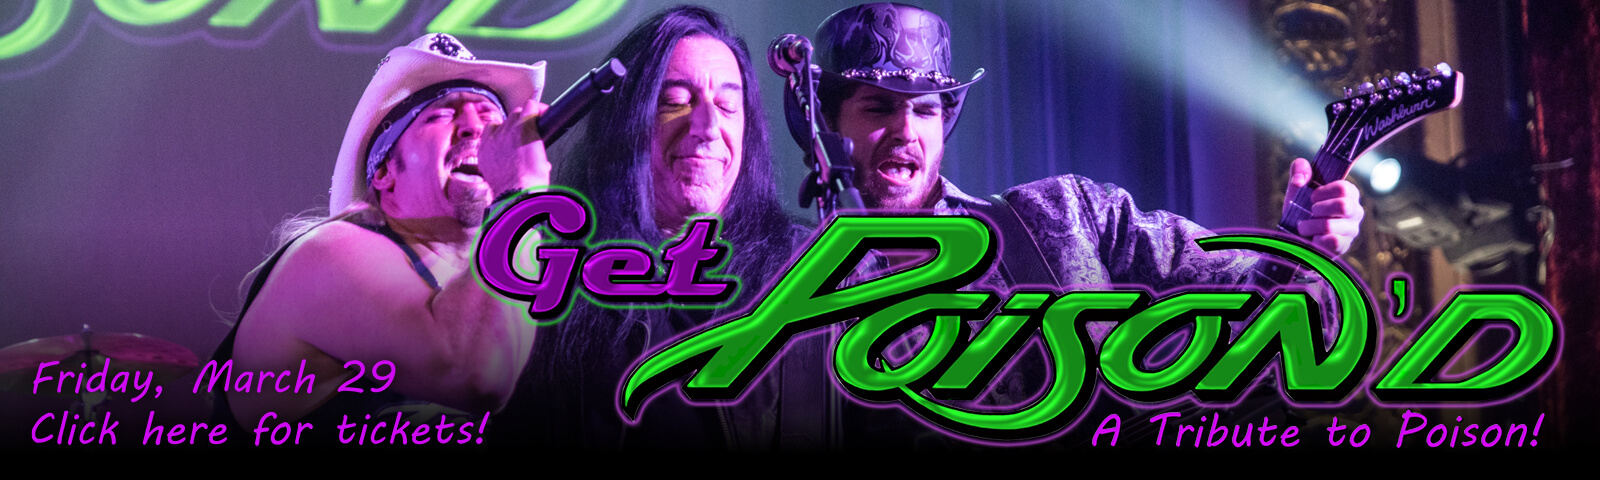 Get Poison'd: Tribute to Poison! Friday, March 29. Click here for tickets!